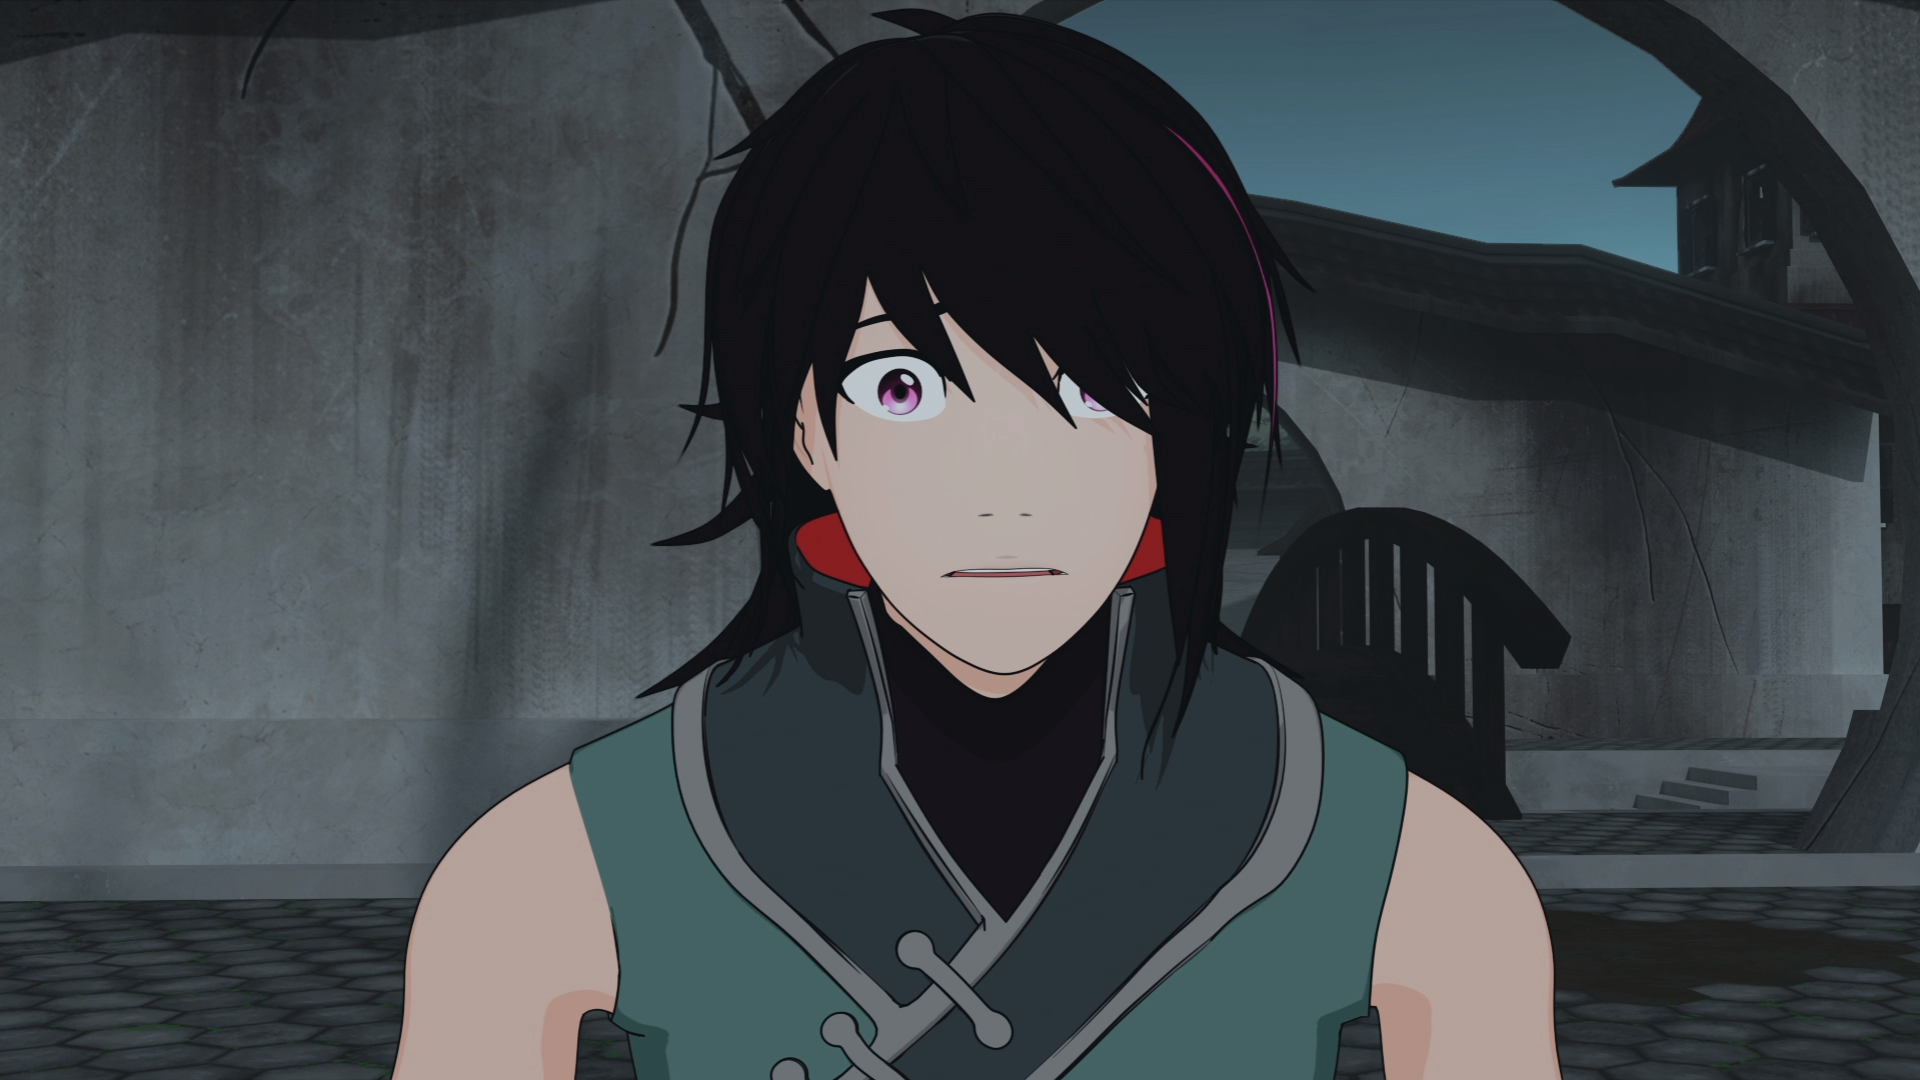 Lie Ren faces the Grimm that destroyed his family and hometown in the finale of RWBY, Vol. 4.